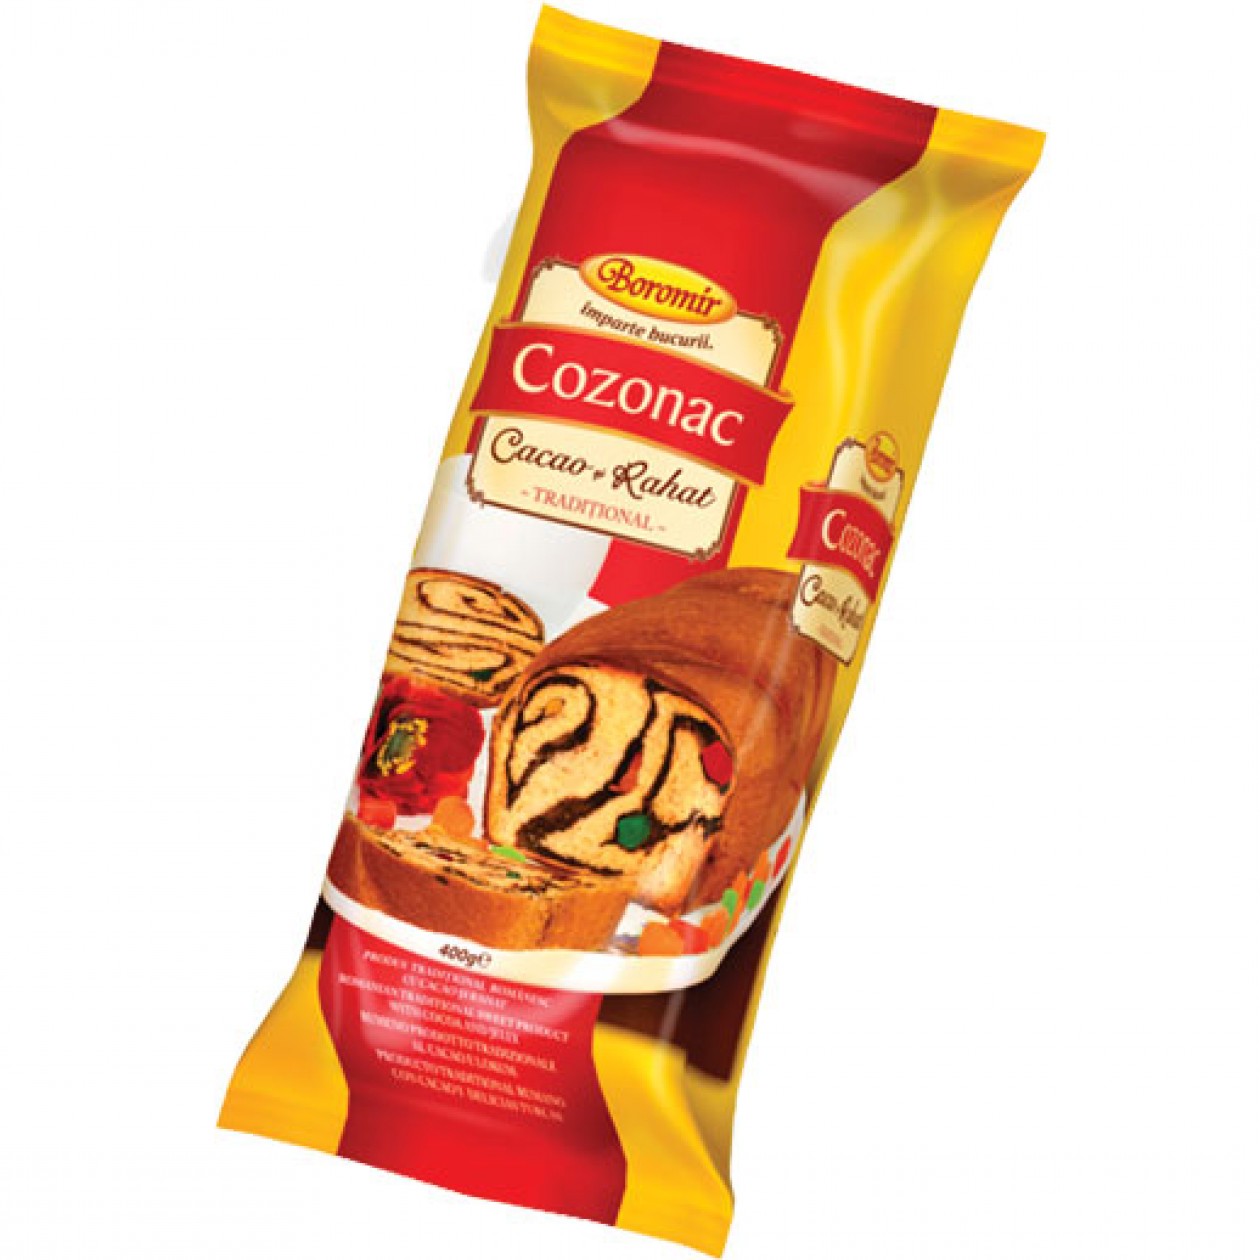 Boromir Cozonac with Cocoa with Jelly (Rahat) 400g